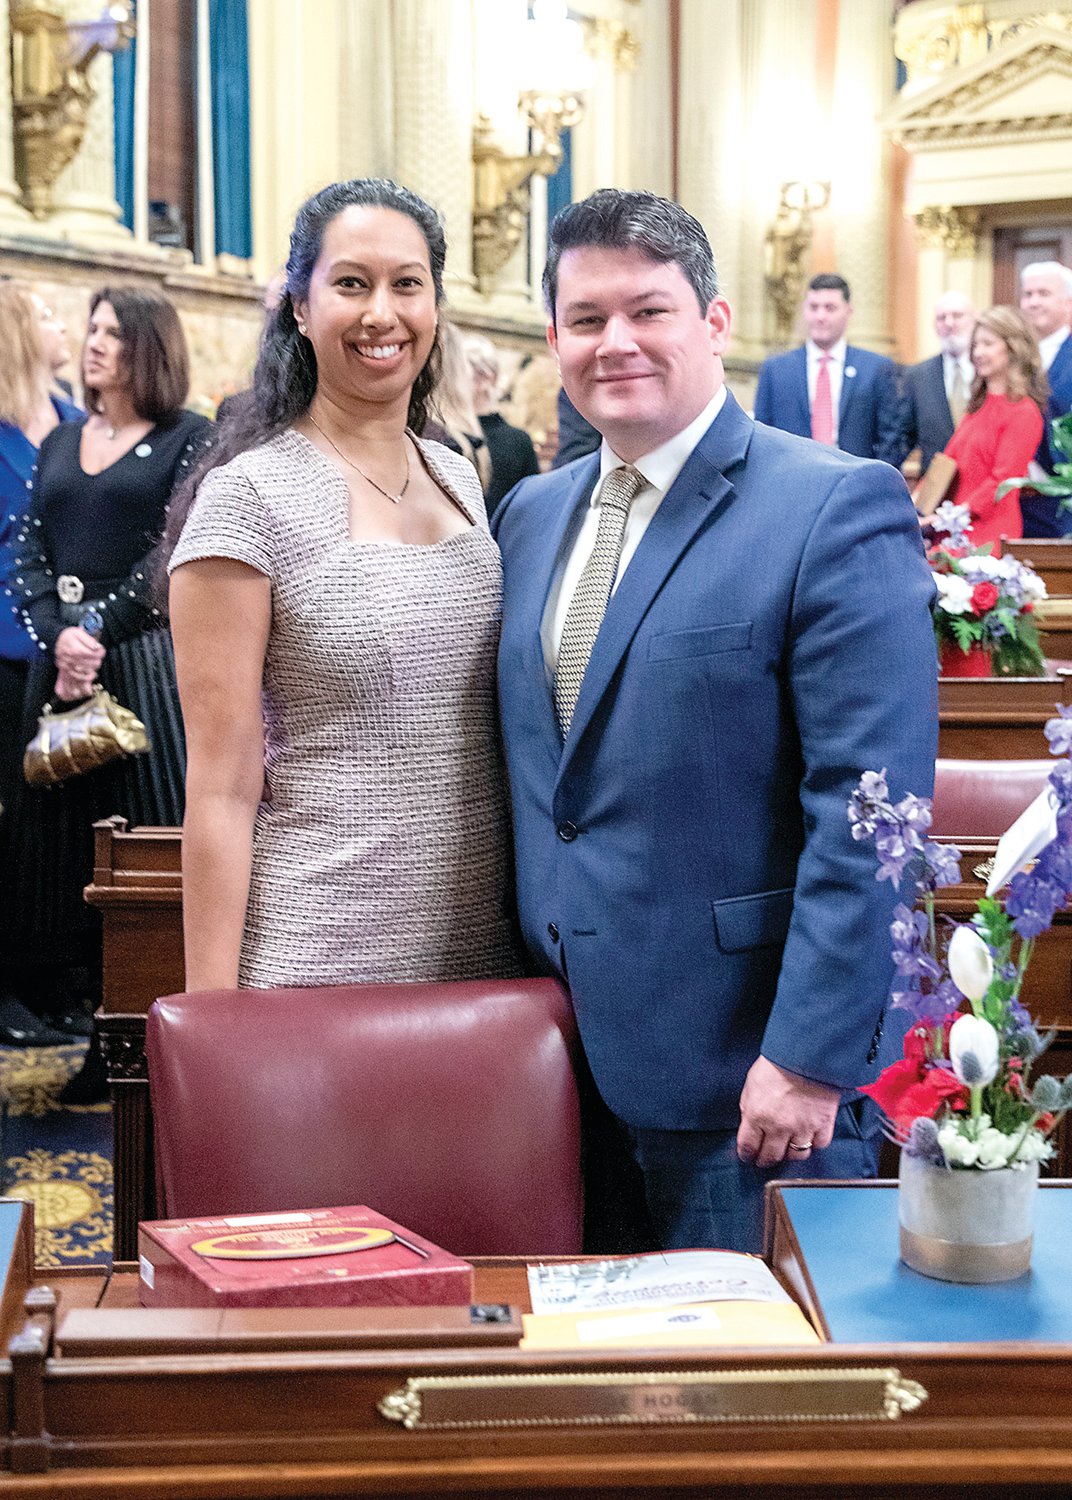 Rep. Joe Hogan, a Republican, represents the 142nd PA House District, which includes Lower Southampton and parts of Middletown and Northampton as well as the boroughs of Langhorne, Langhorne Manor and Penndel. Reach his district office at 215-752-6750.